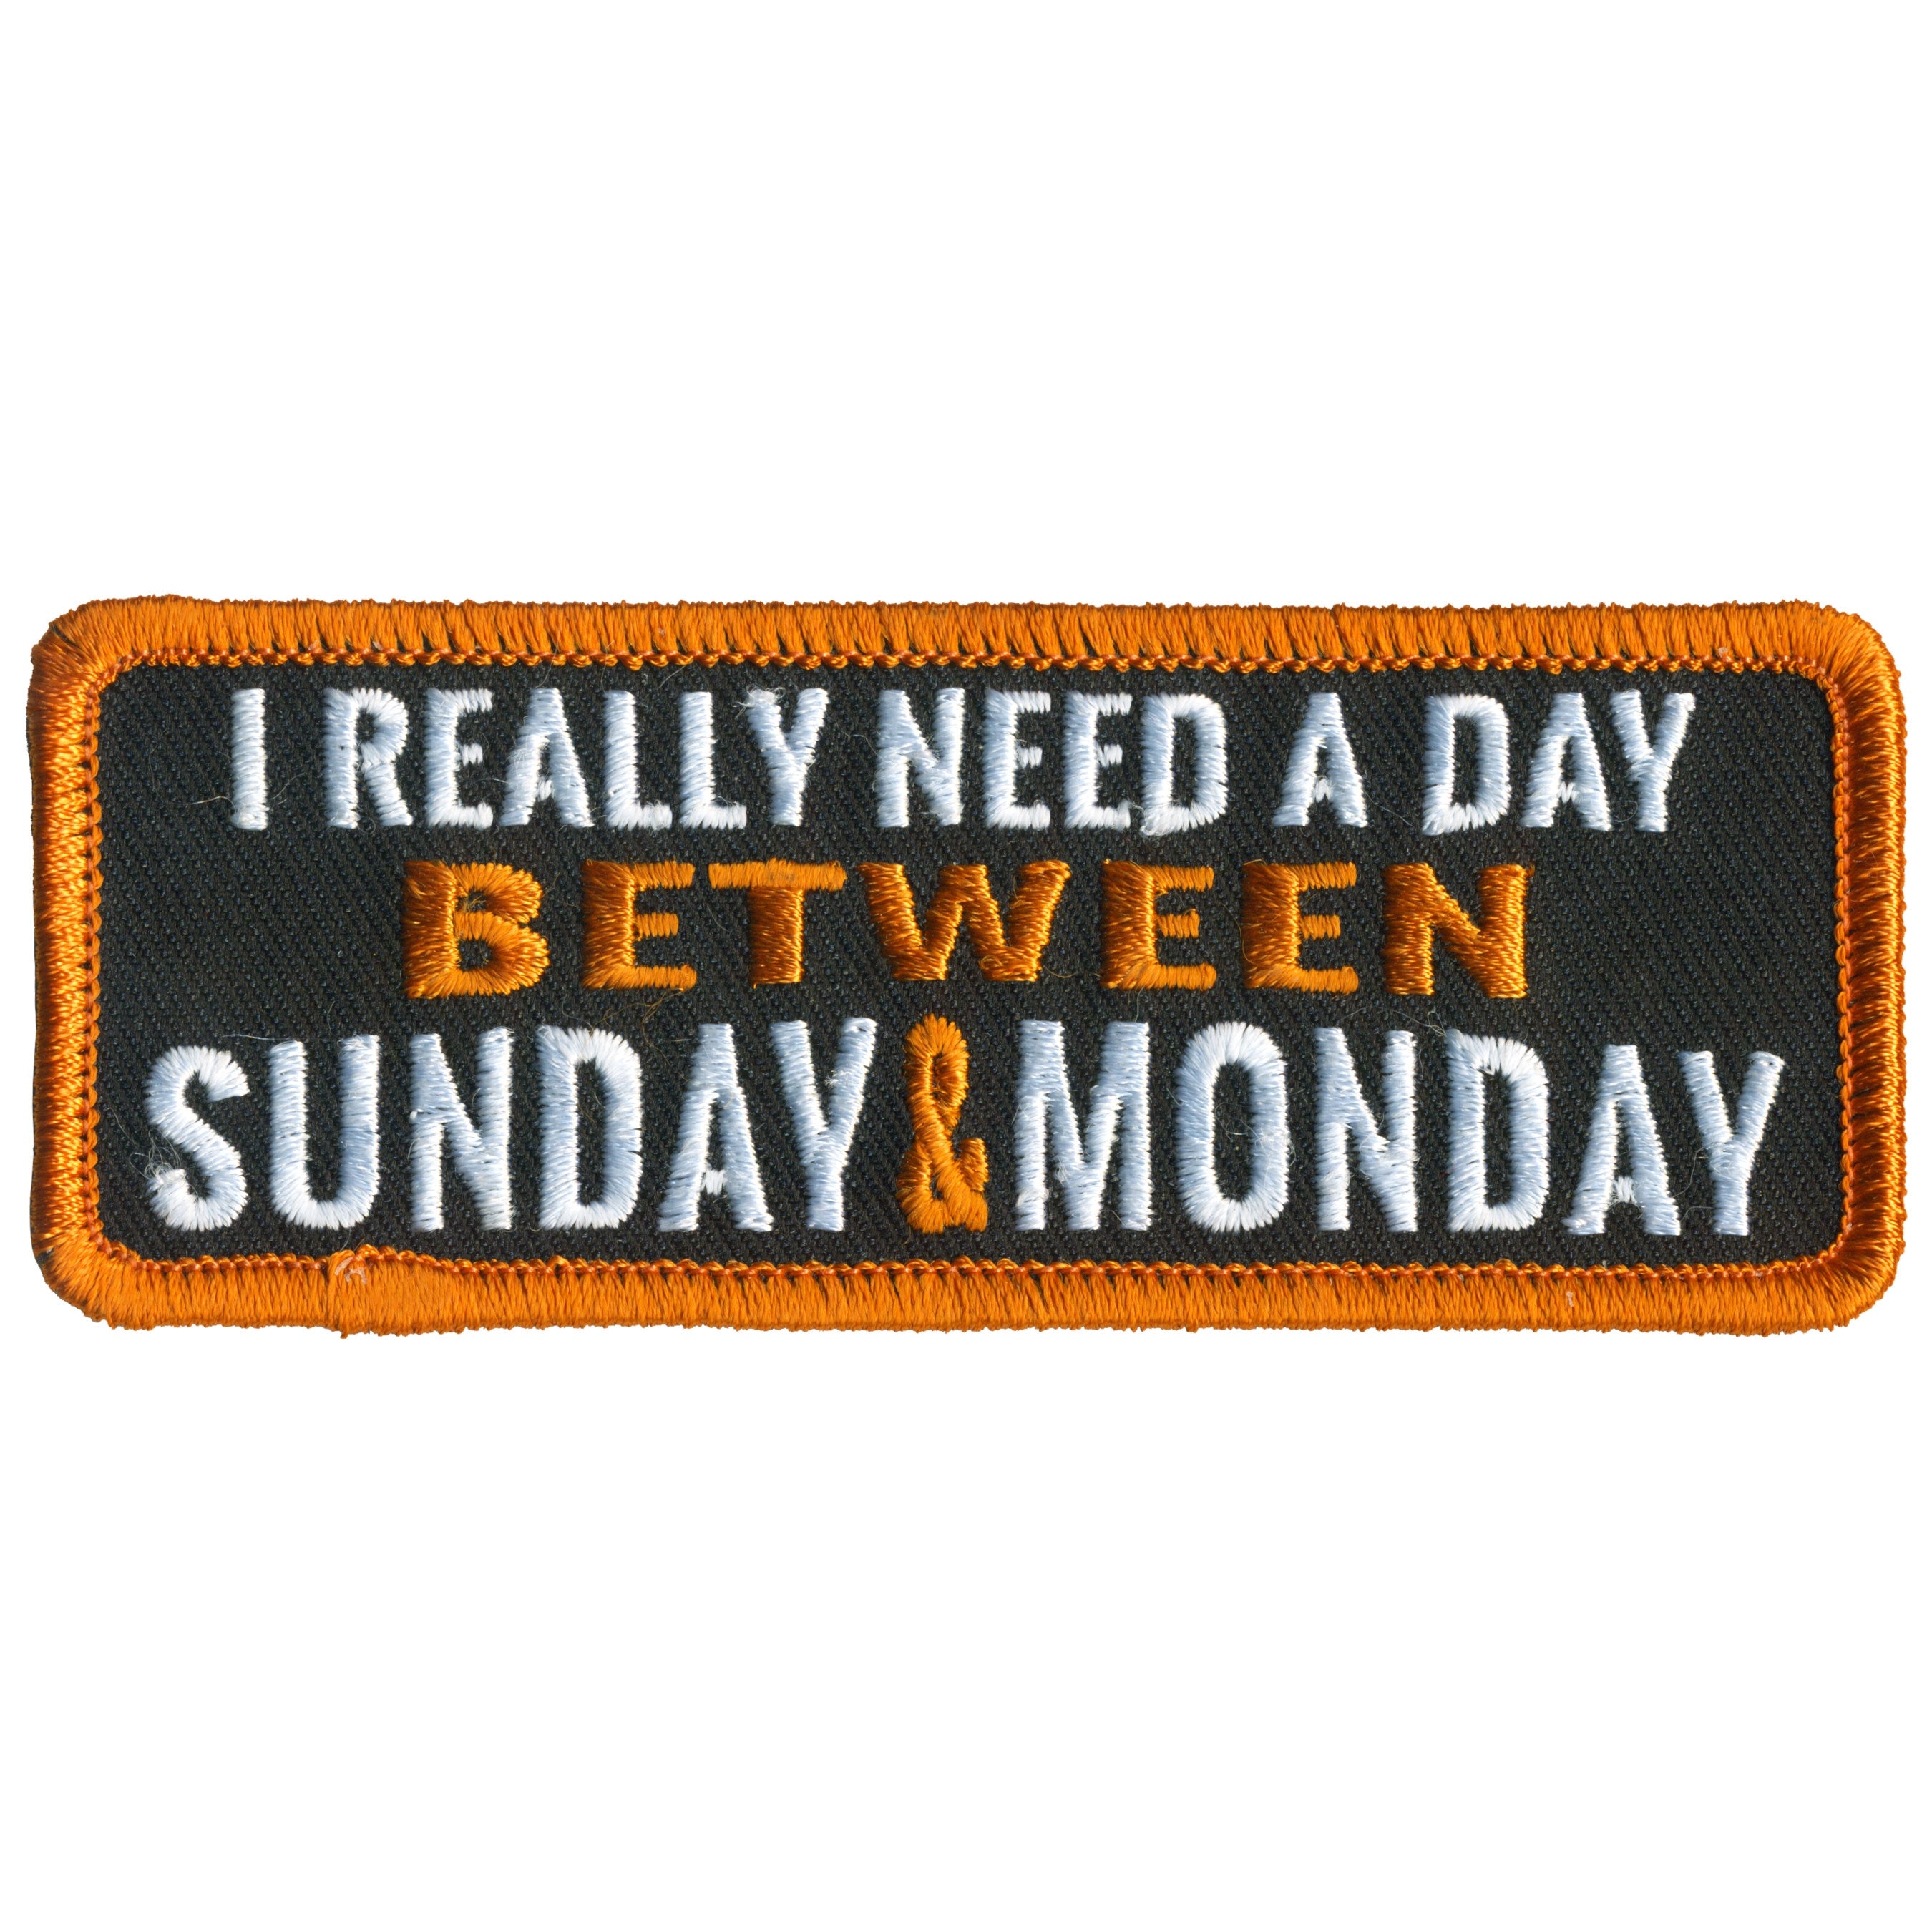 Hot Leathers PPL9795 Between Sunday and Monday 4"x 2" Patch